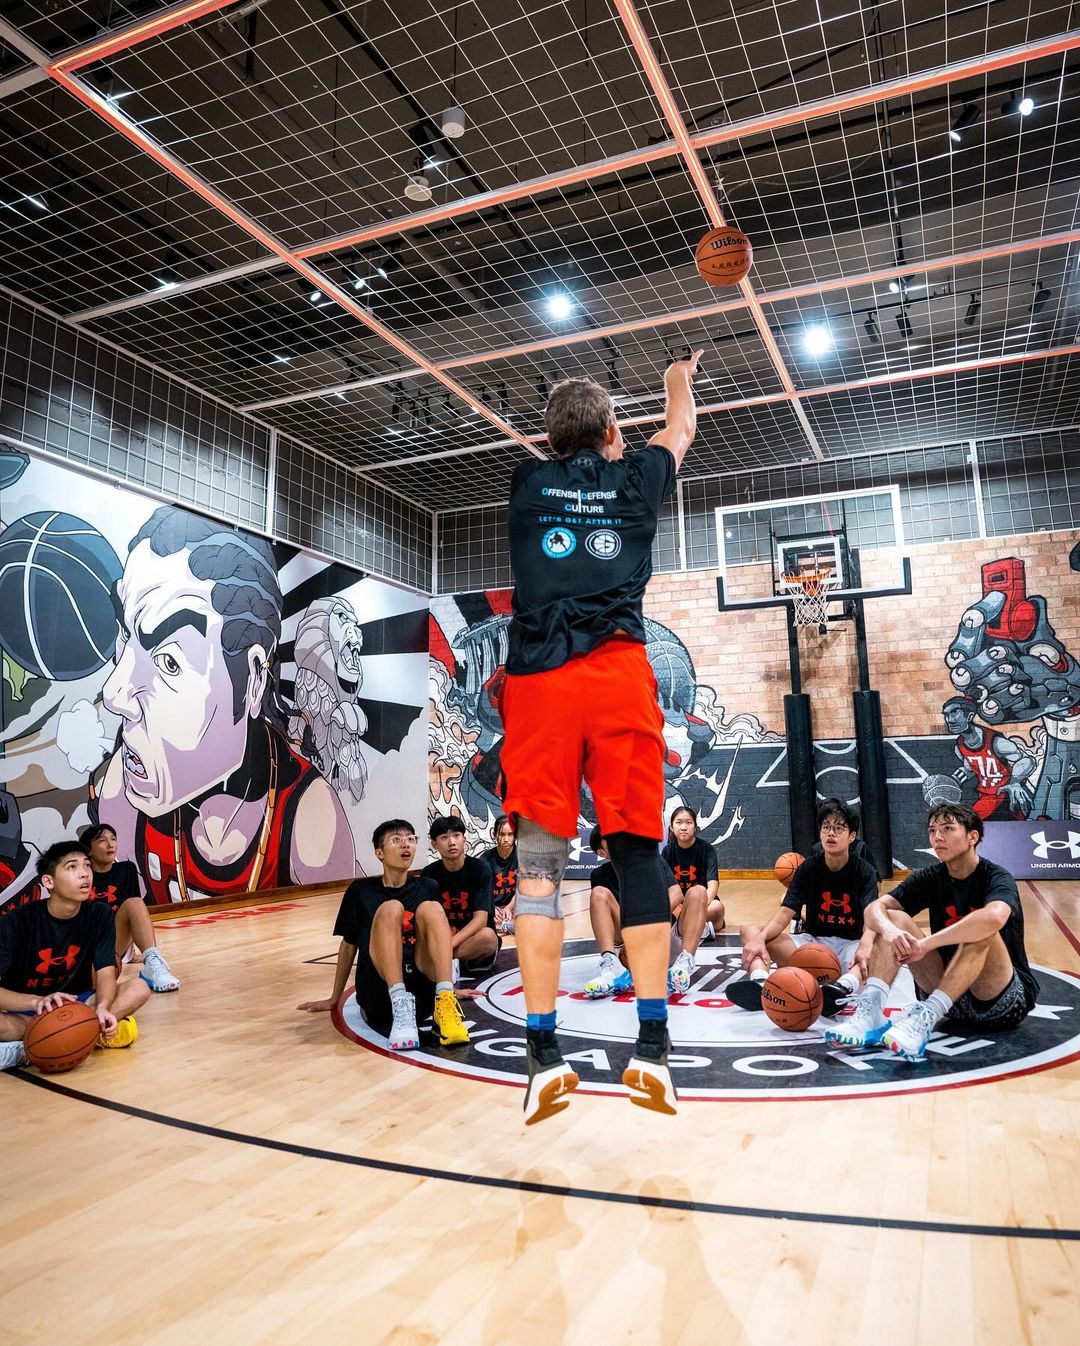 Foot Locker Orchard Gateway - Basketball Courts In Singapore